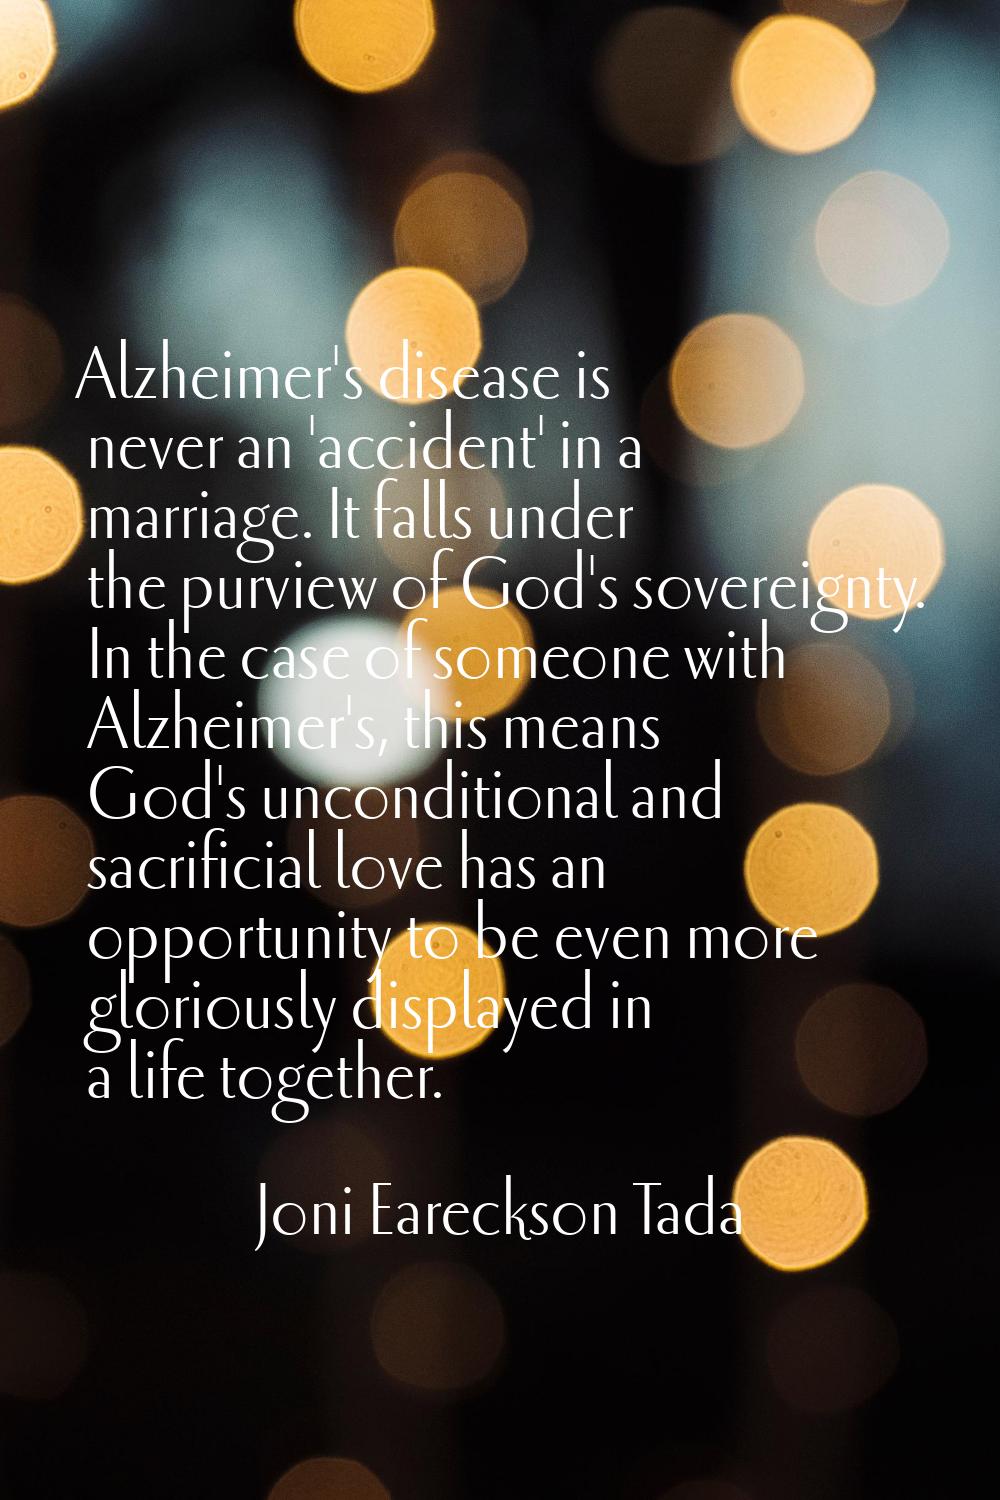 Alzheimer's disease is never an 'accident' in a marriage. It falls under the purview of God's sover